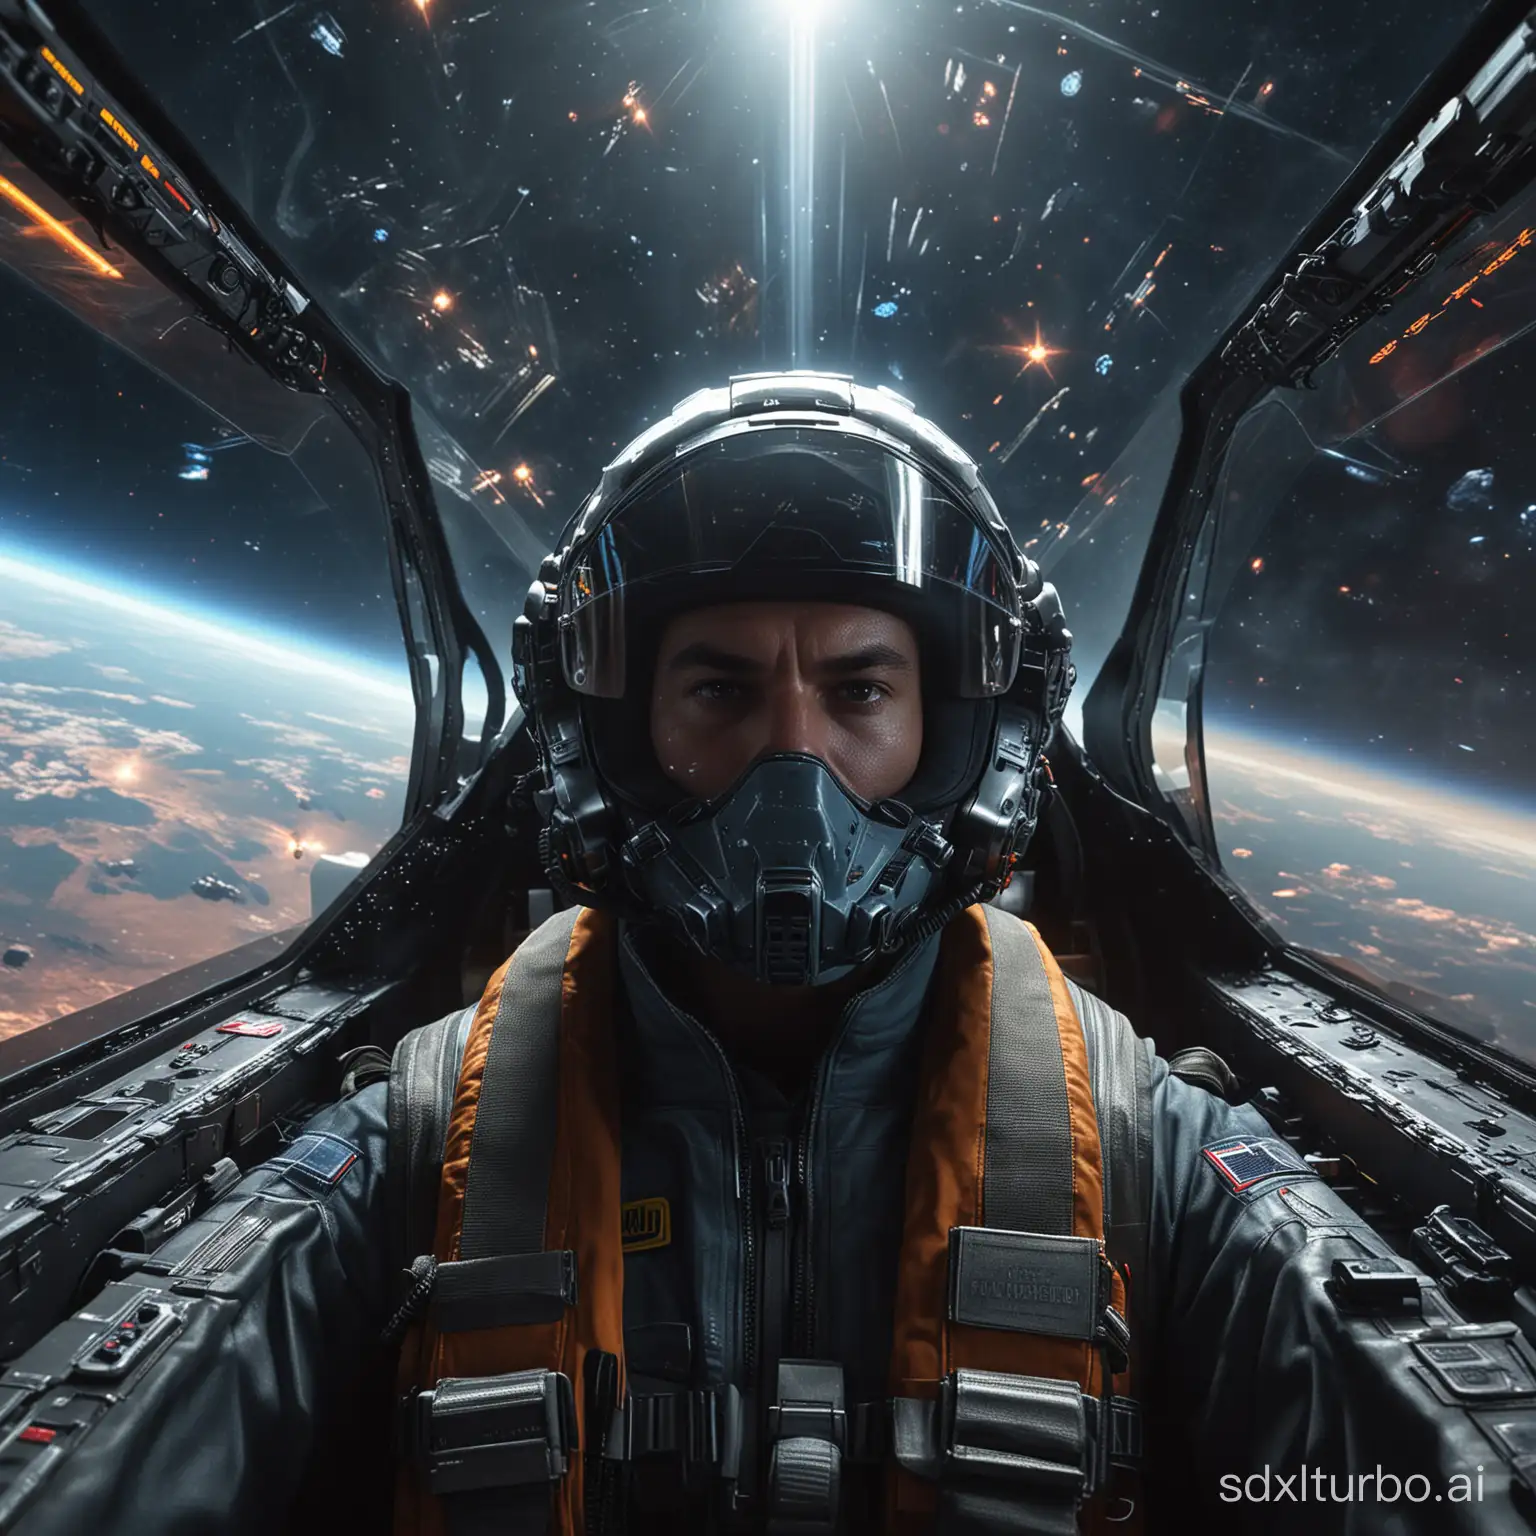 portrait of a space fighter inside his fighter jet, there is a reflection on the visor for the HUD plus some information about speed, altitude and tracking information about enemy fighter. show in the scene the sense of an intense arial battel., nebula background